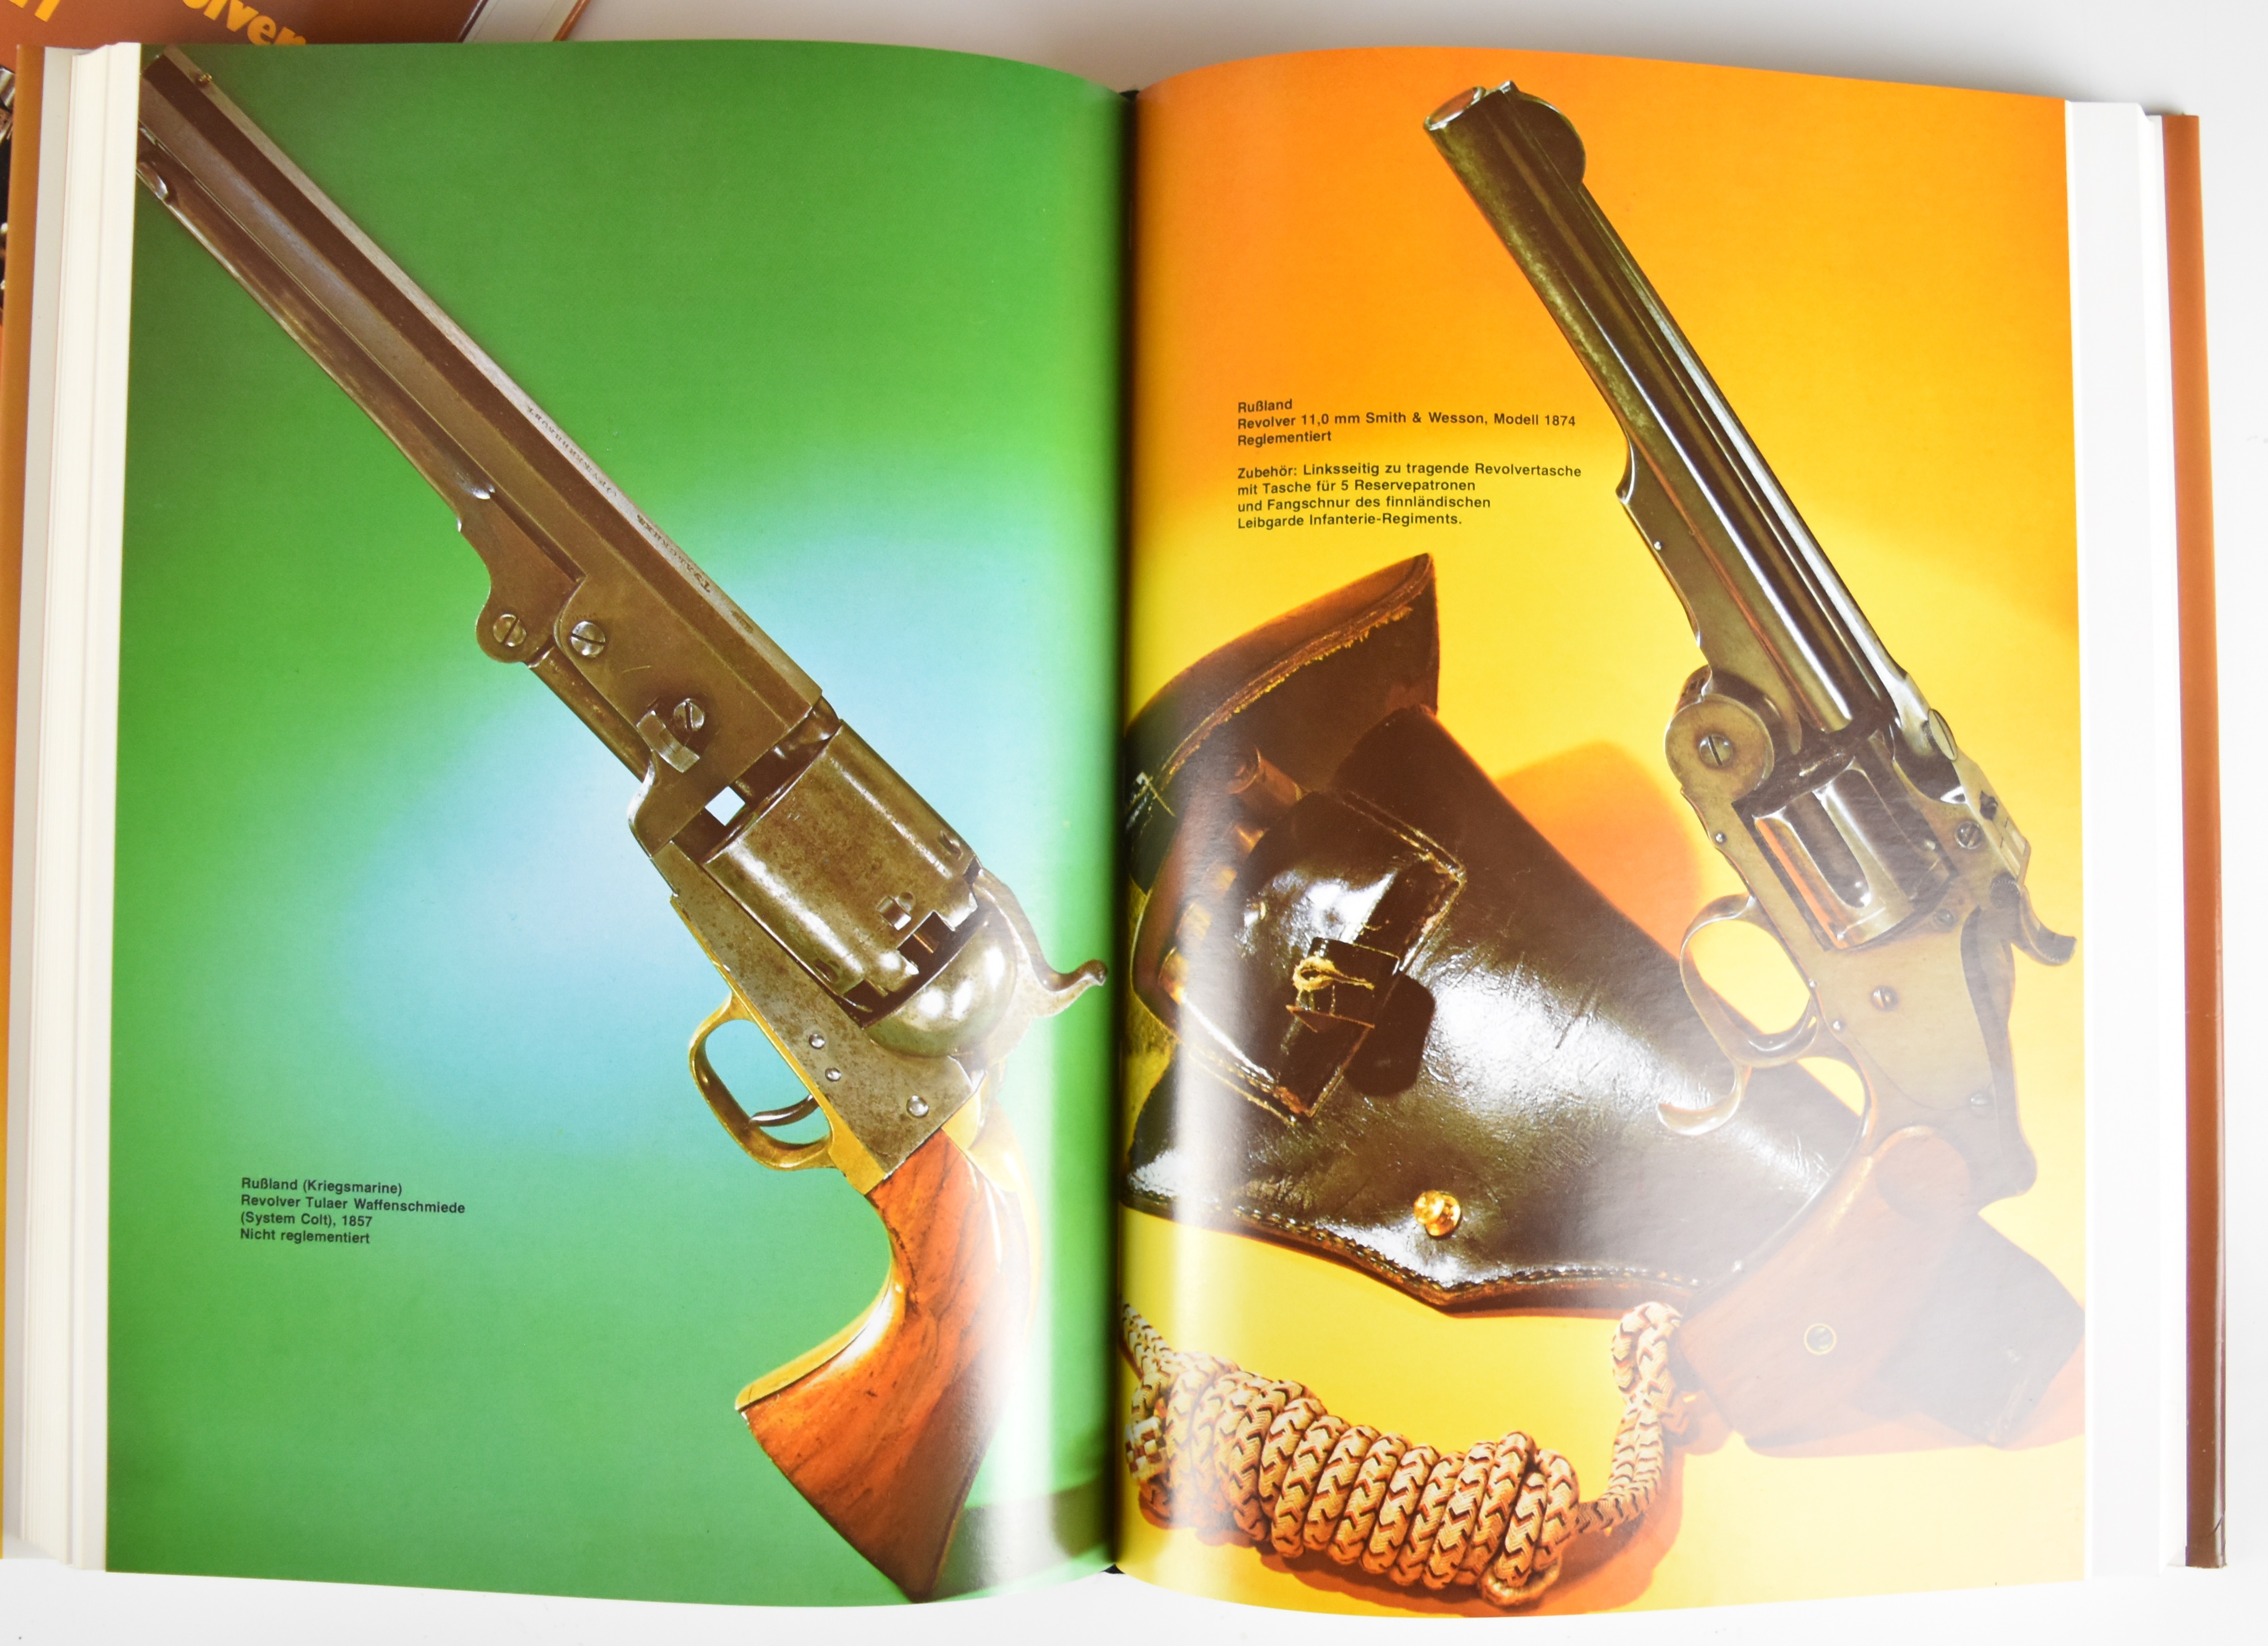 [Shooting] History and Technology of European Military Revolvers by Rolf H Muller, Volumes 1 and 2 - Image 4 of 4